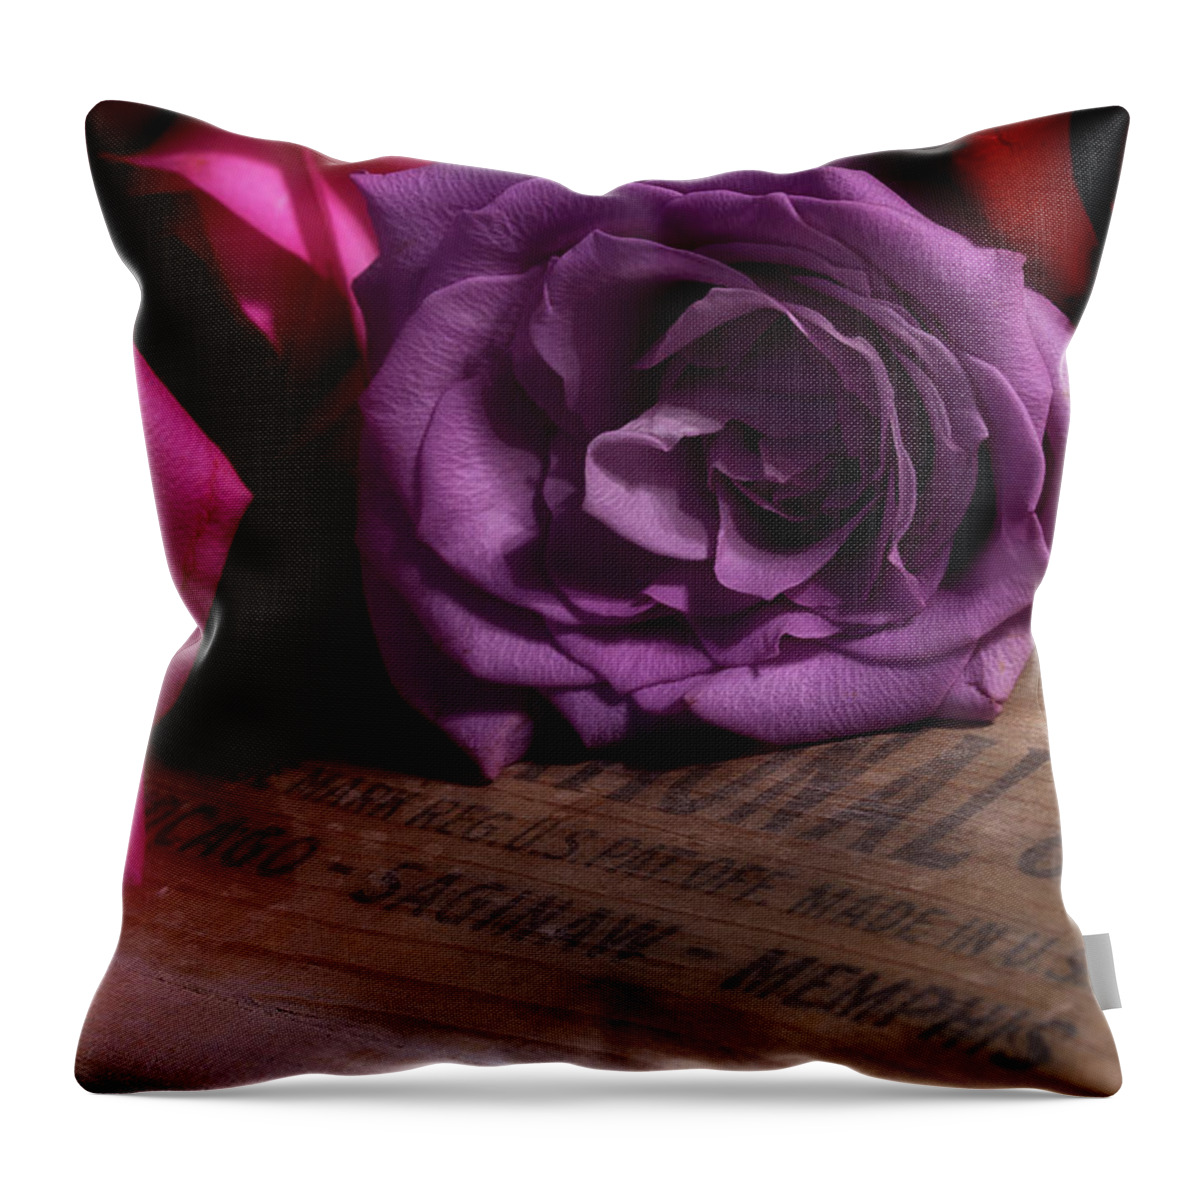 Roses Throw Pillow featuring the photograph Rose Series 2 by Mike Eingle